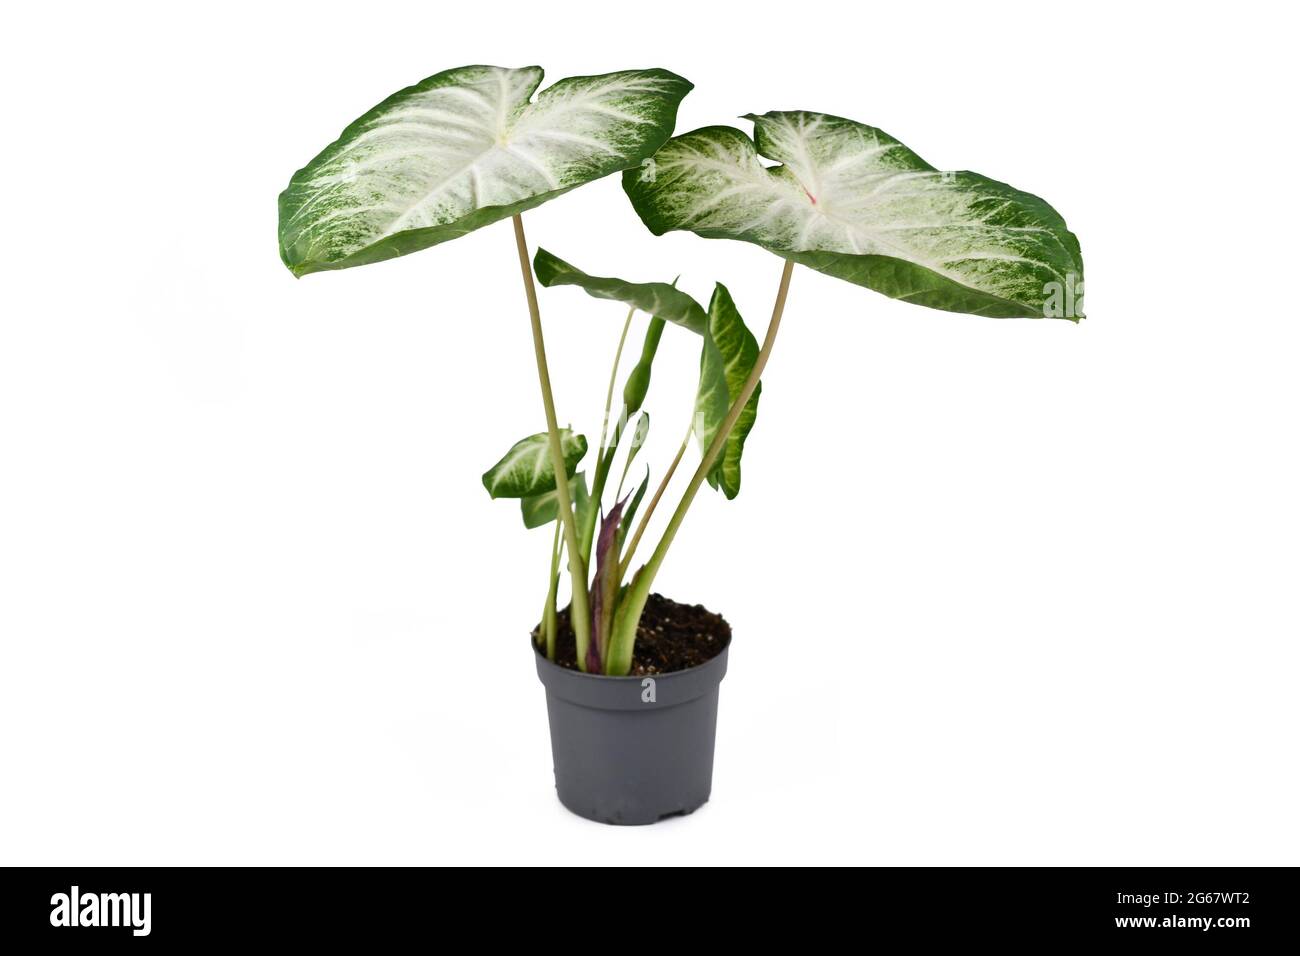 Exotic 'Caladium Aaron' houseplant with white and green large leaves in flower pot isolated on white background Stock Photo